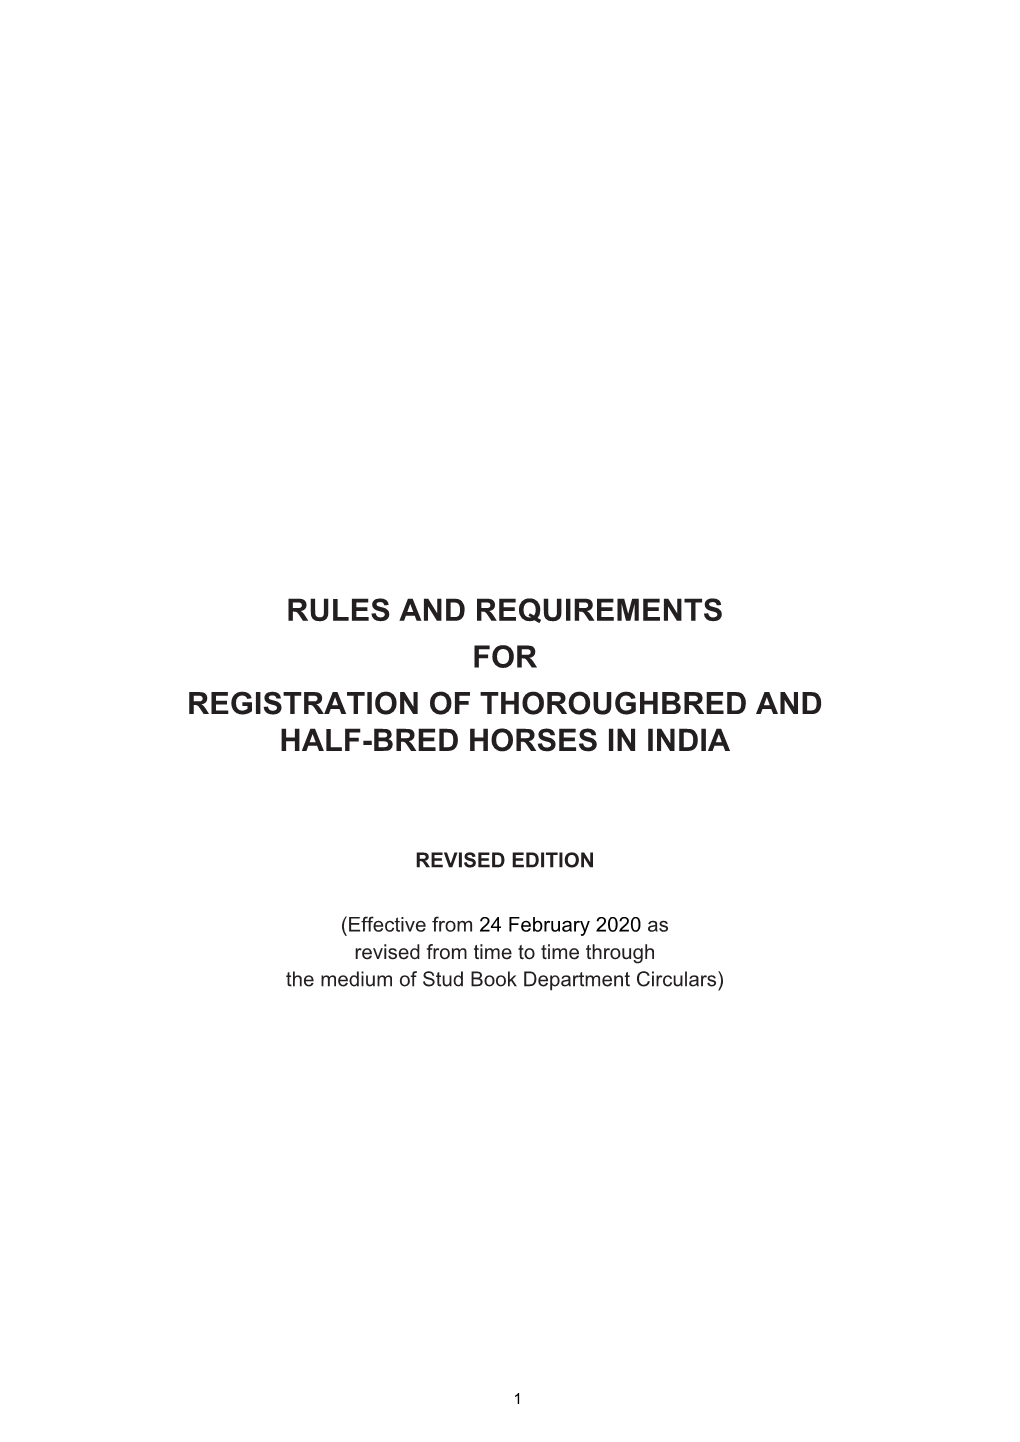 Rules and Requirements for Registration of Thoroughbred and Half-Bred Horses in India